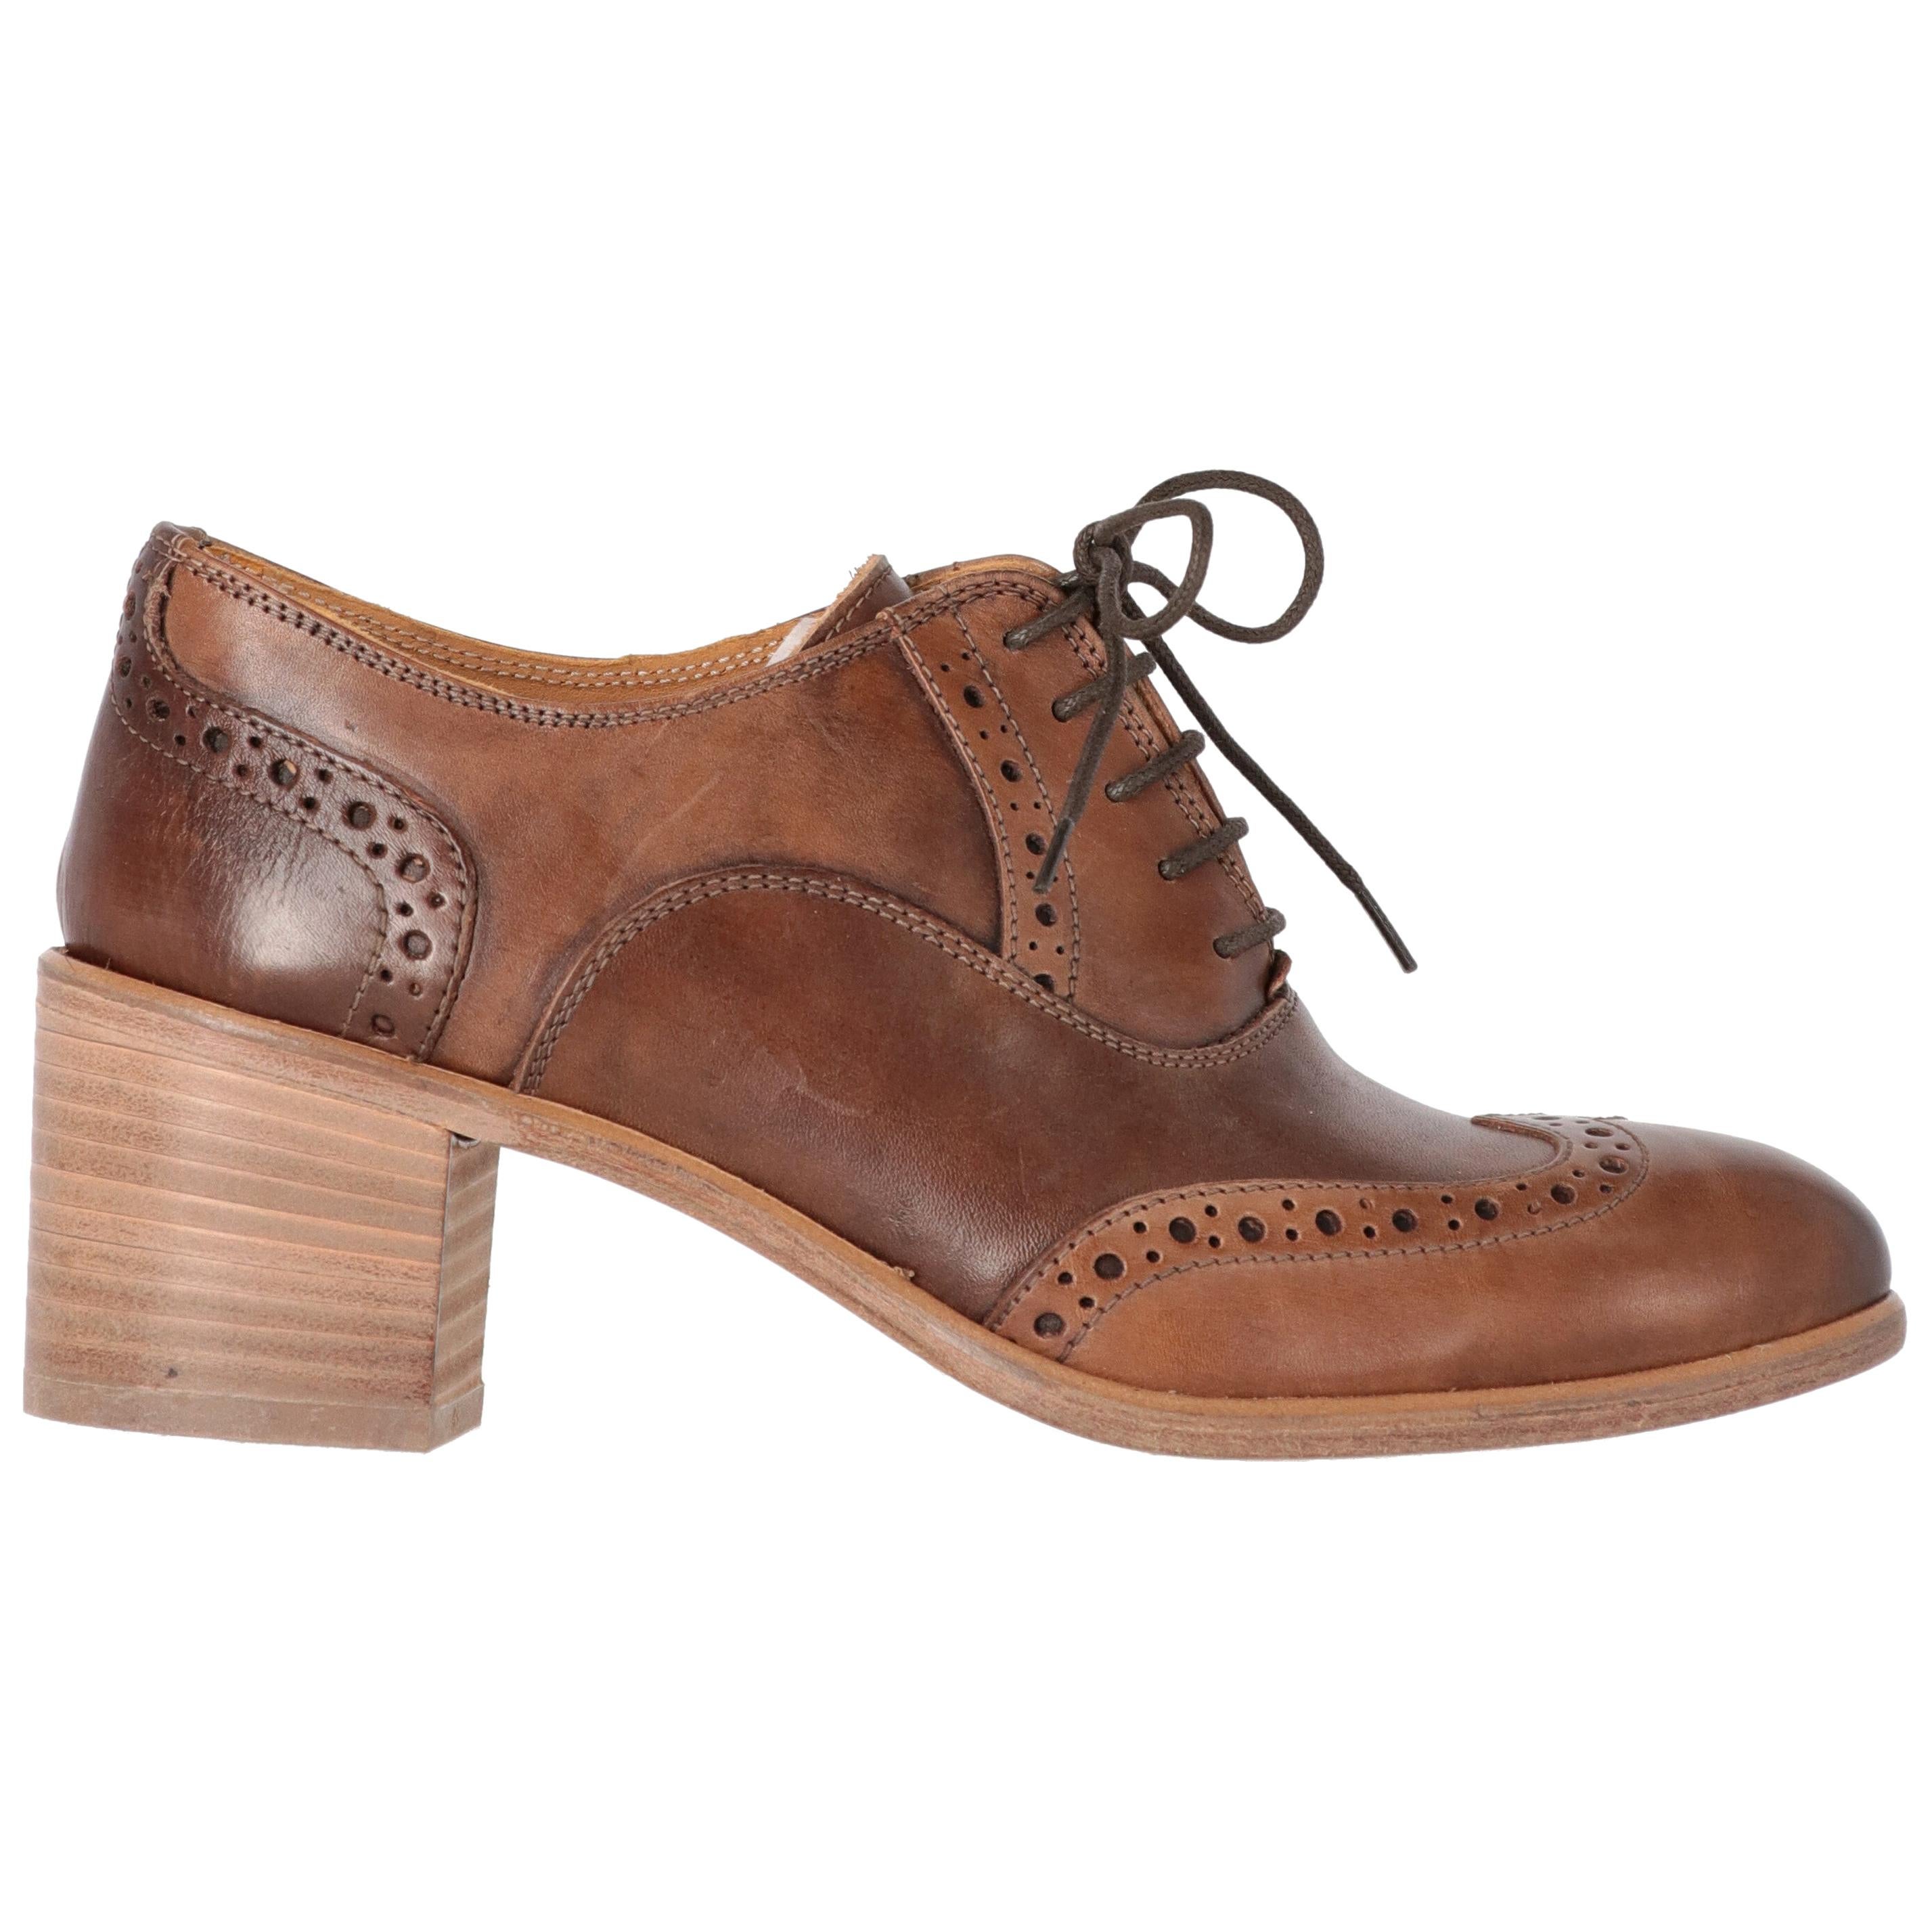 2010s Pollini Leather Lace-up Brogue Shoes